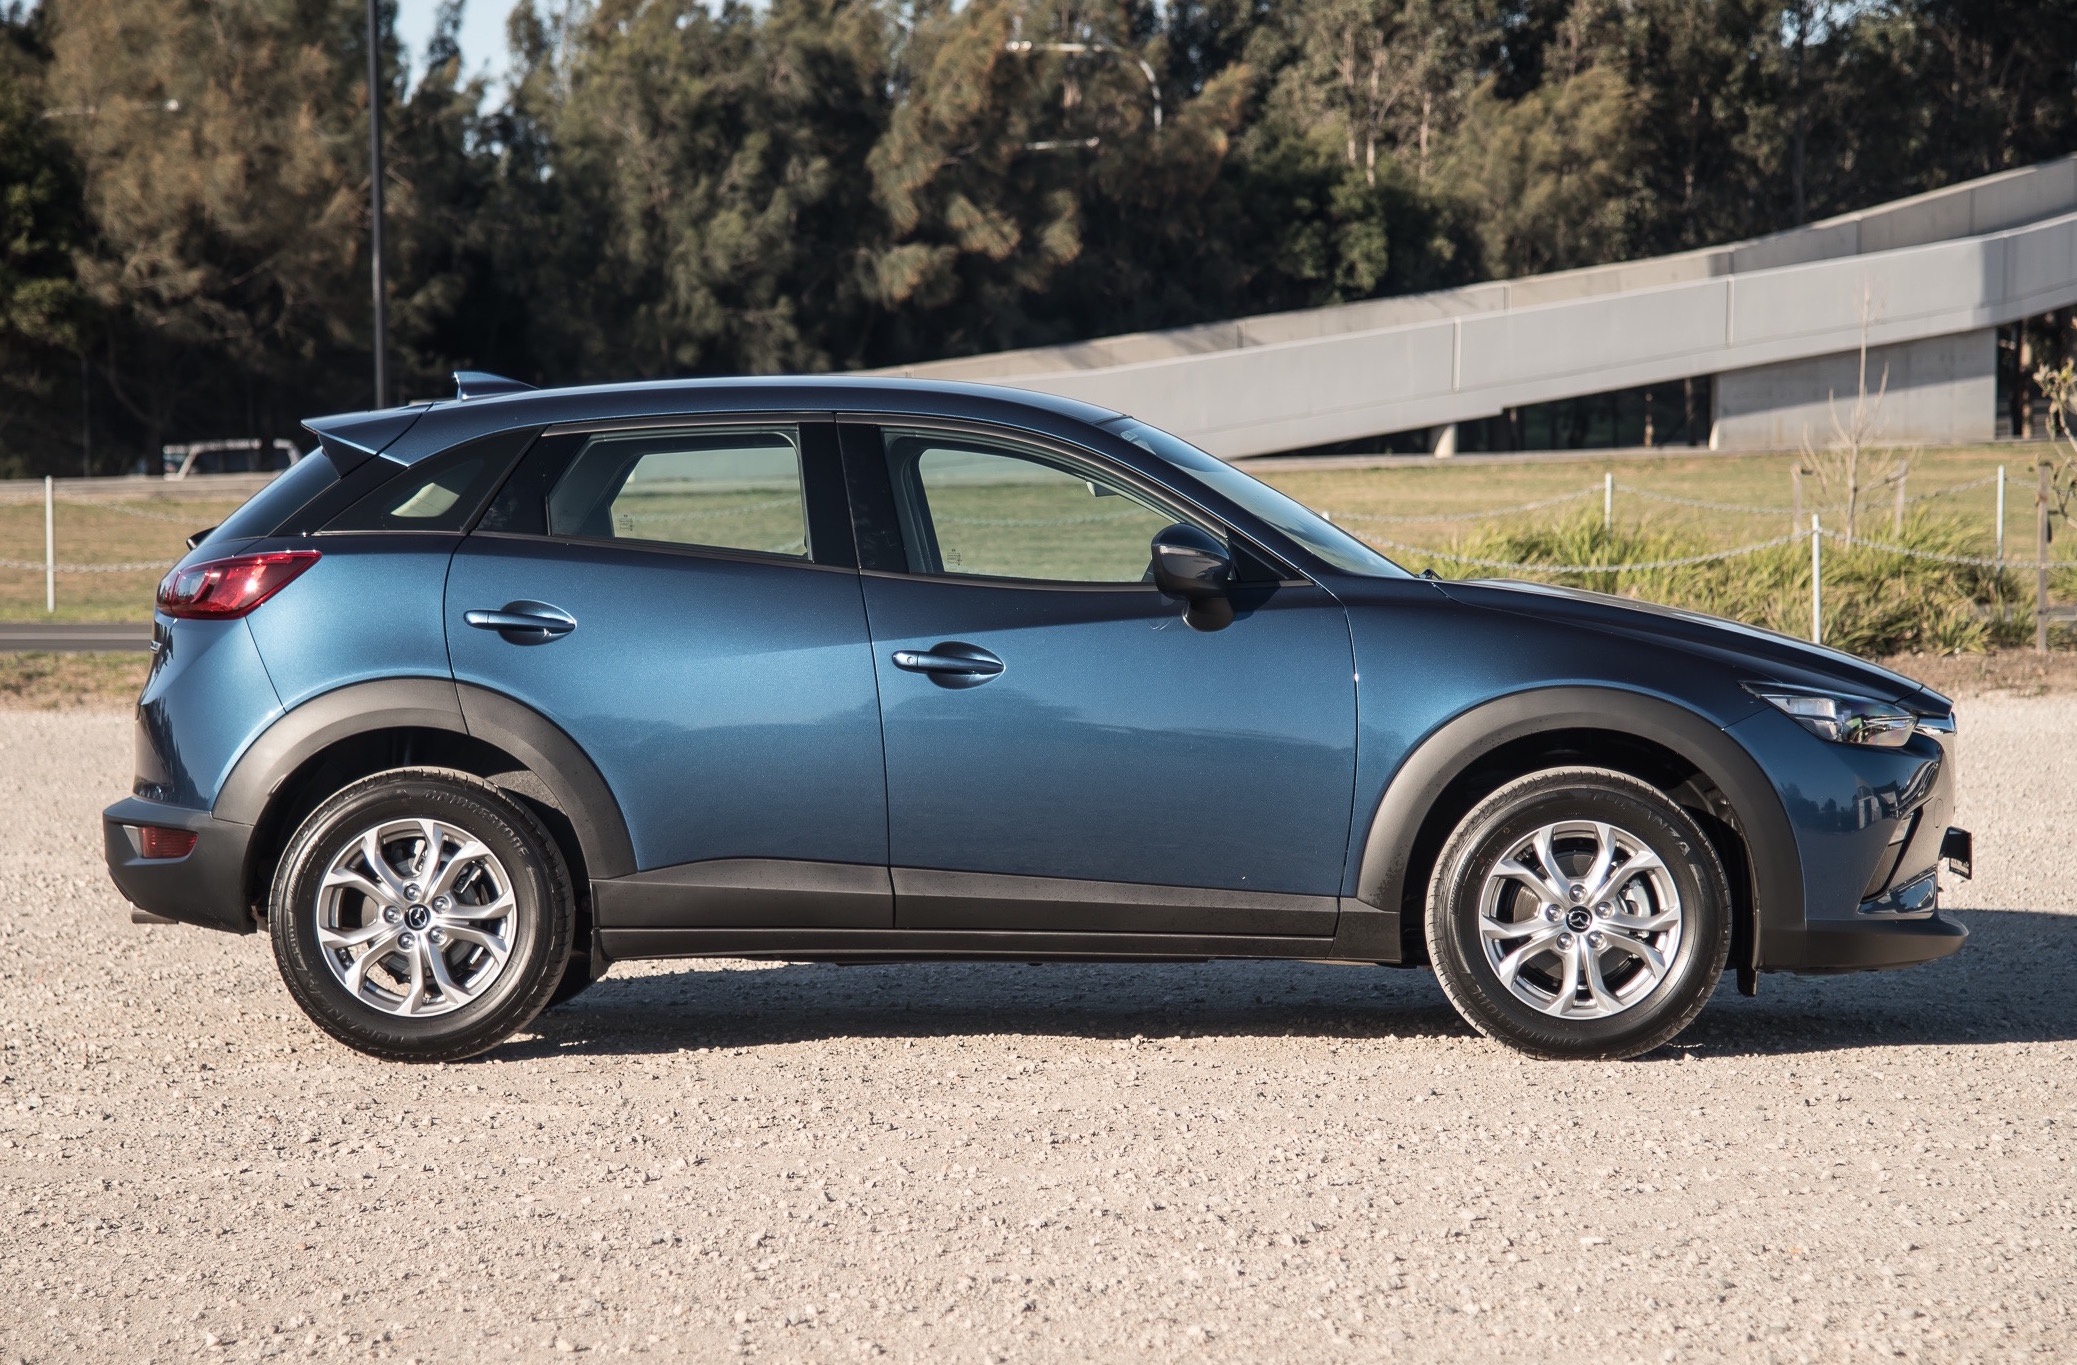 2019 Mazda CX-3 Maxx Sport review: Pros and Cons